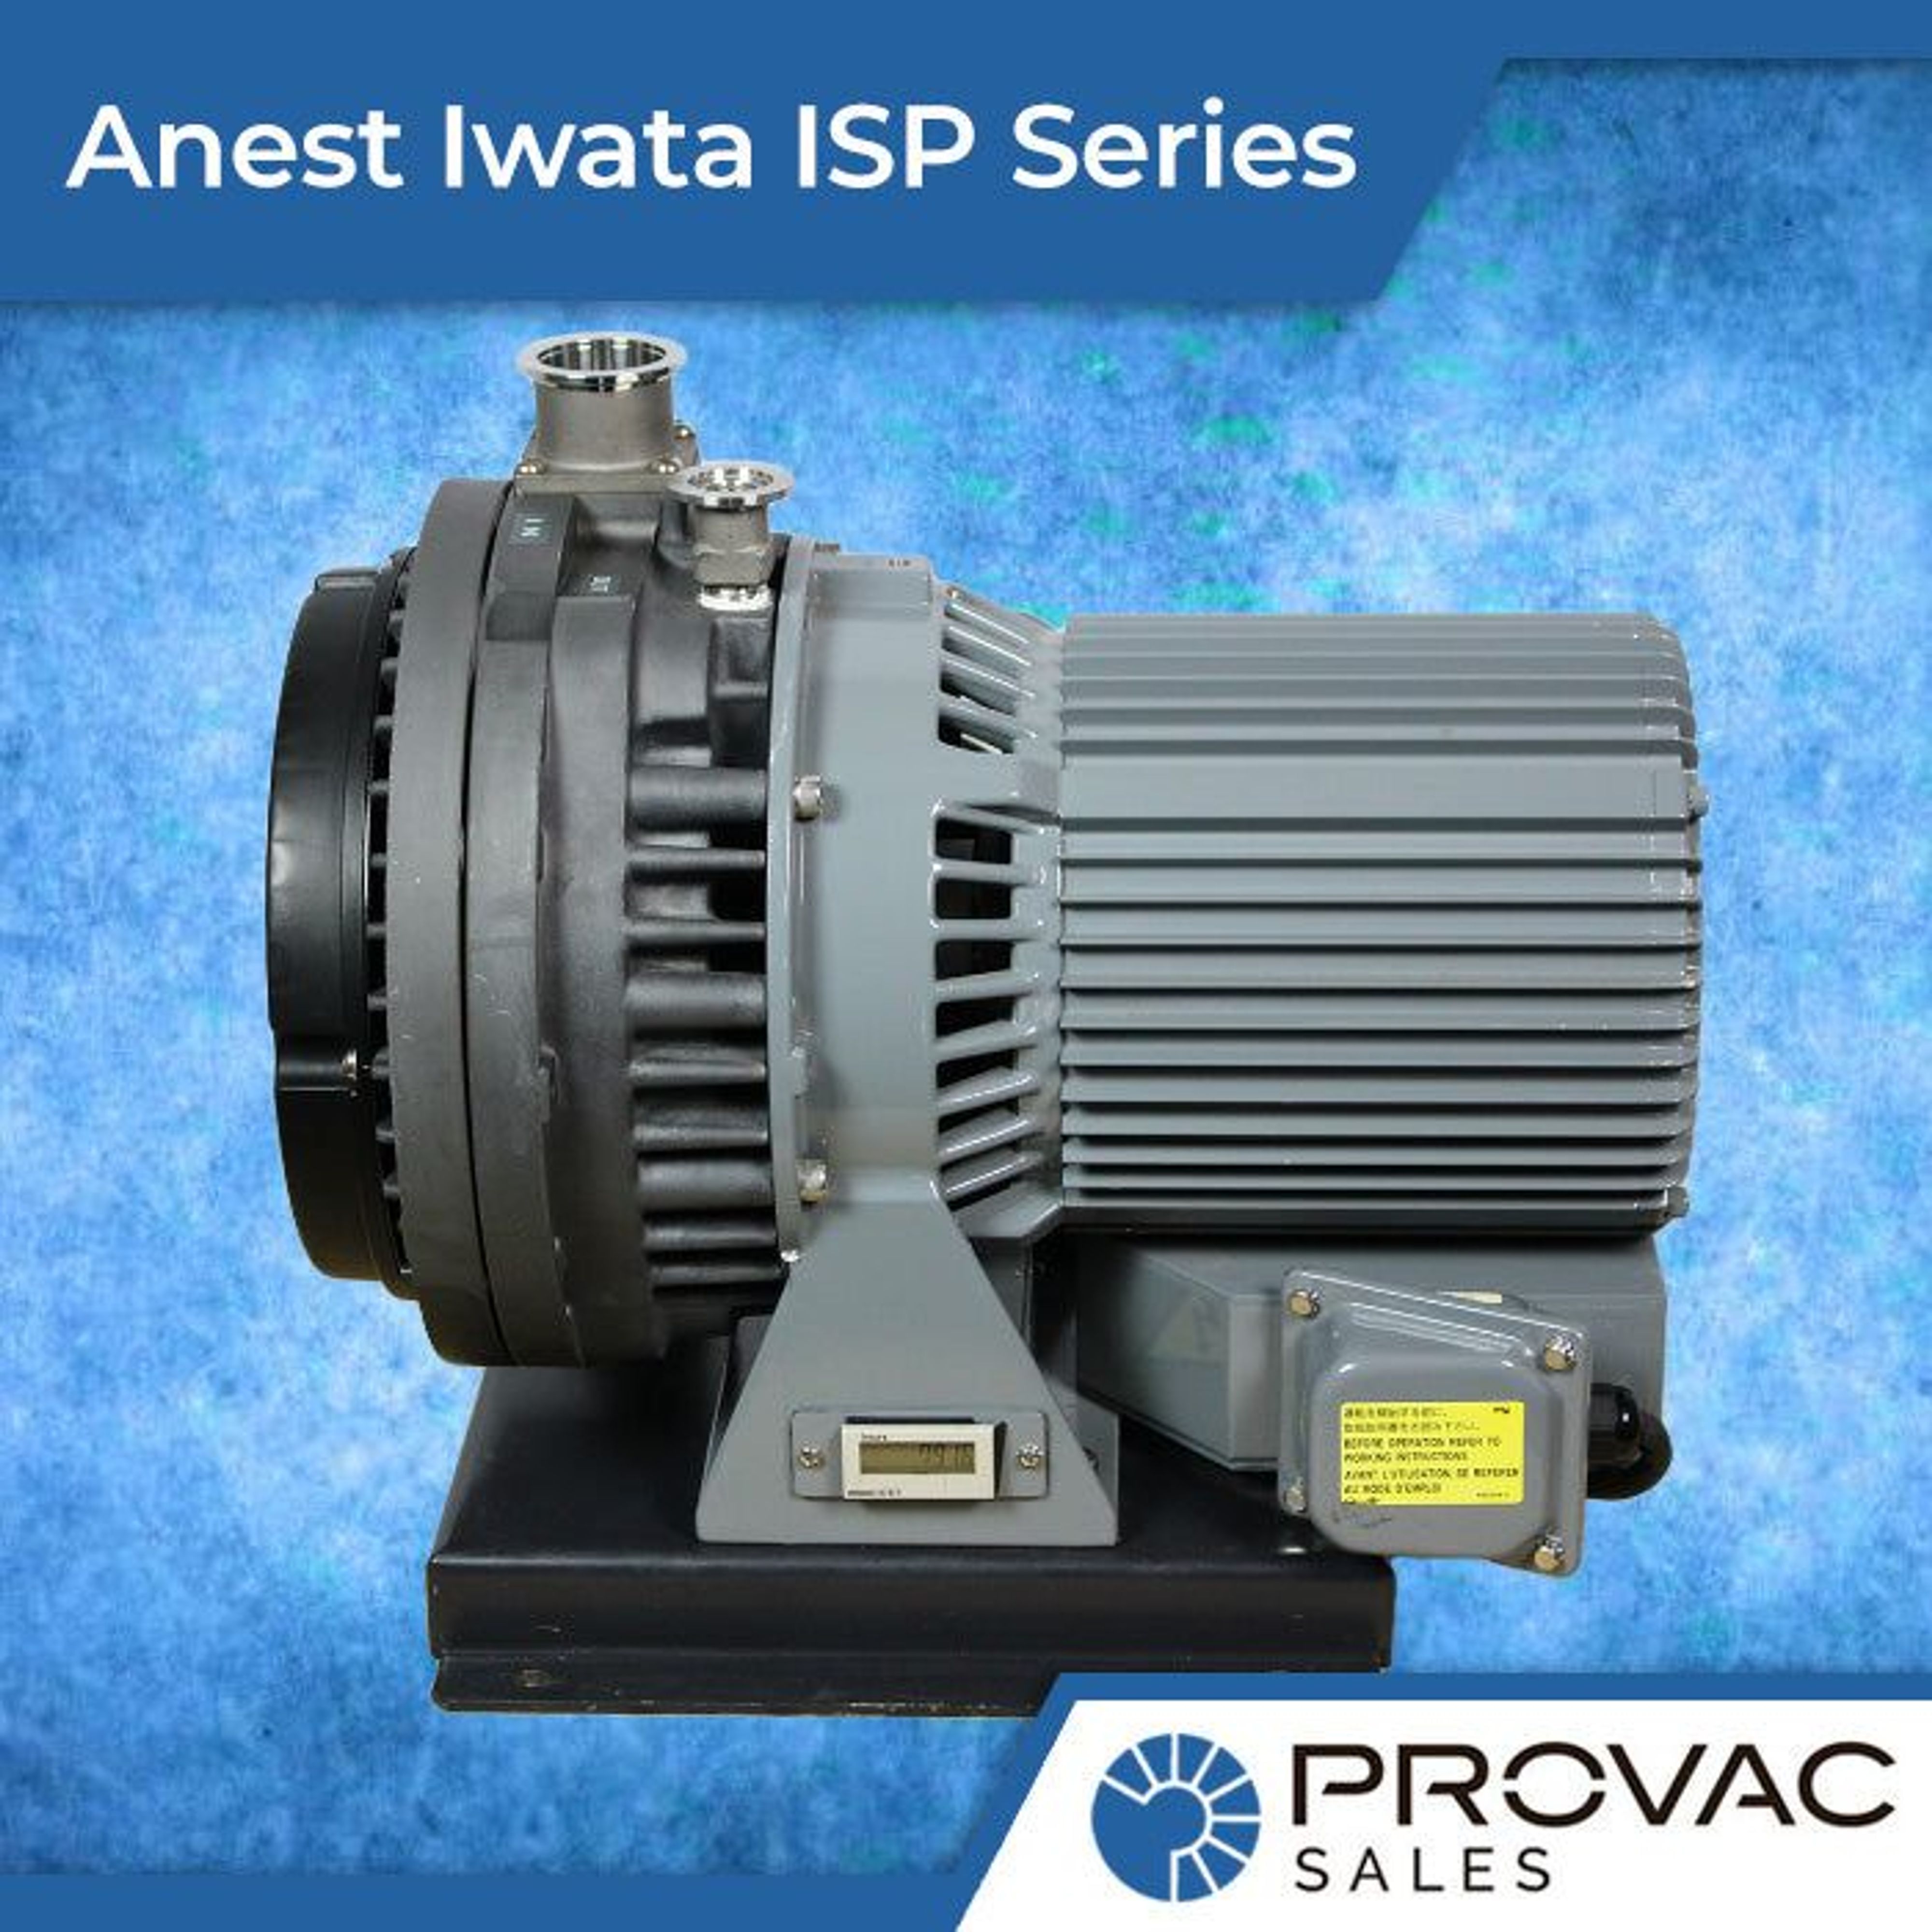 Anest Iwata ISP Dry Scroll Roughing Pump Series Background